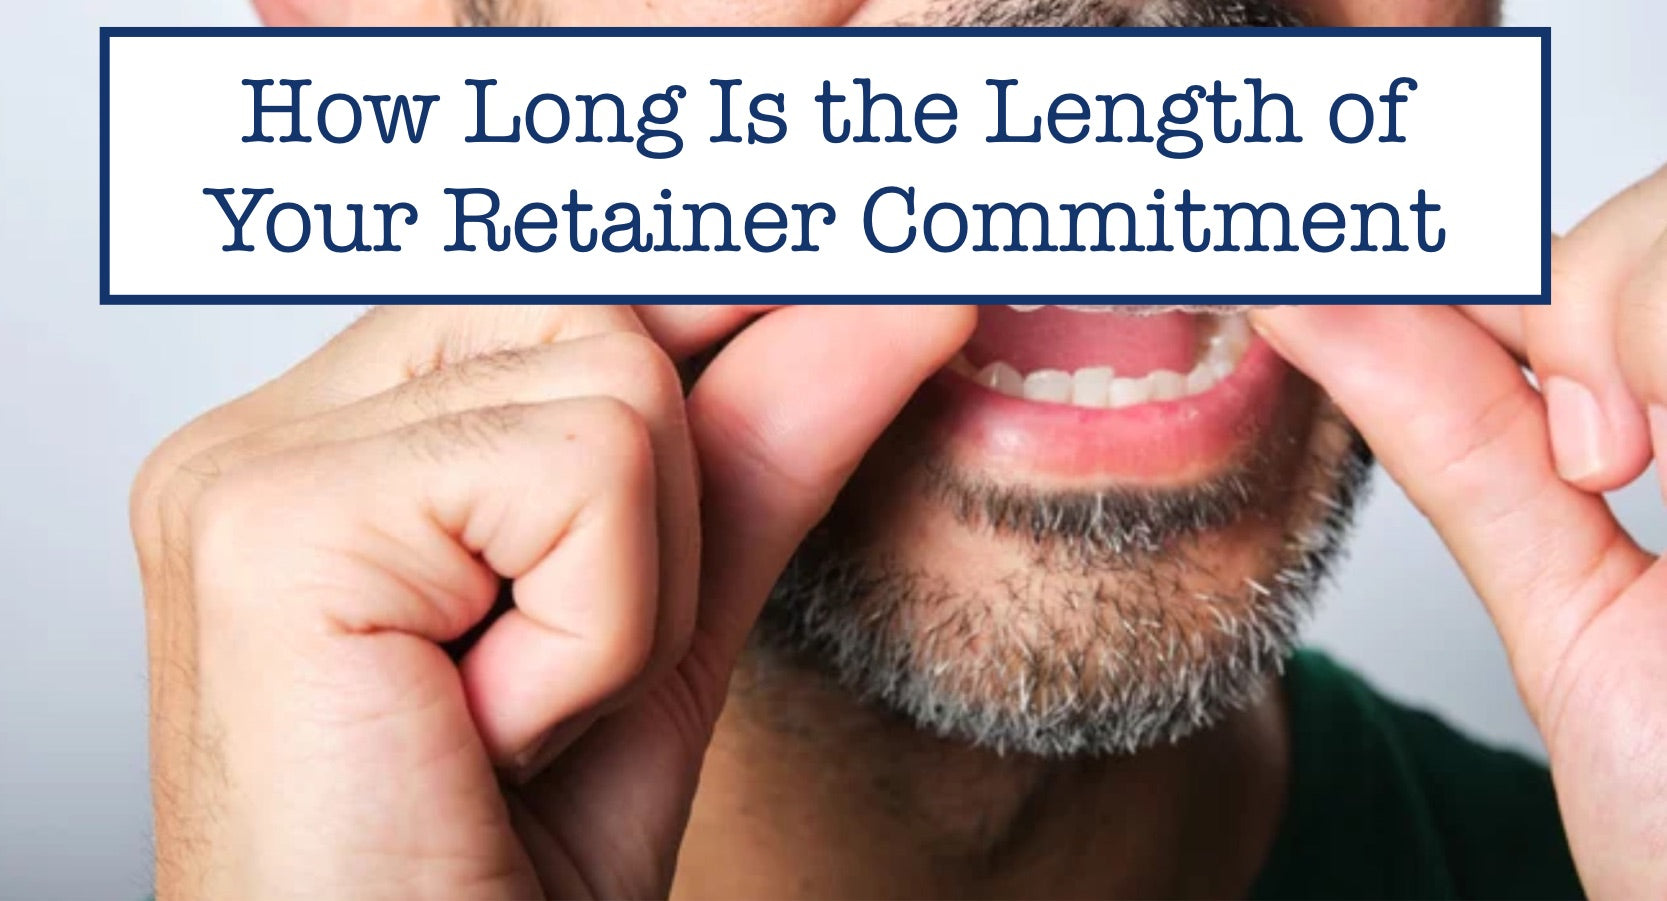 How Long Is the Length of Your Retainer Commitment